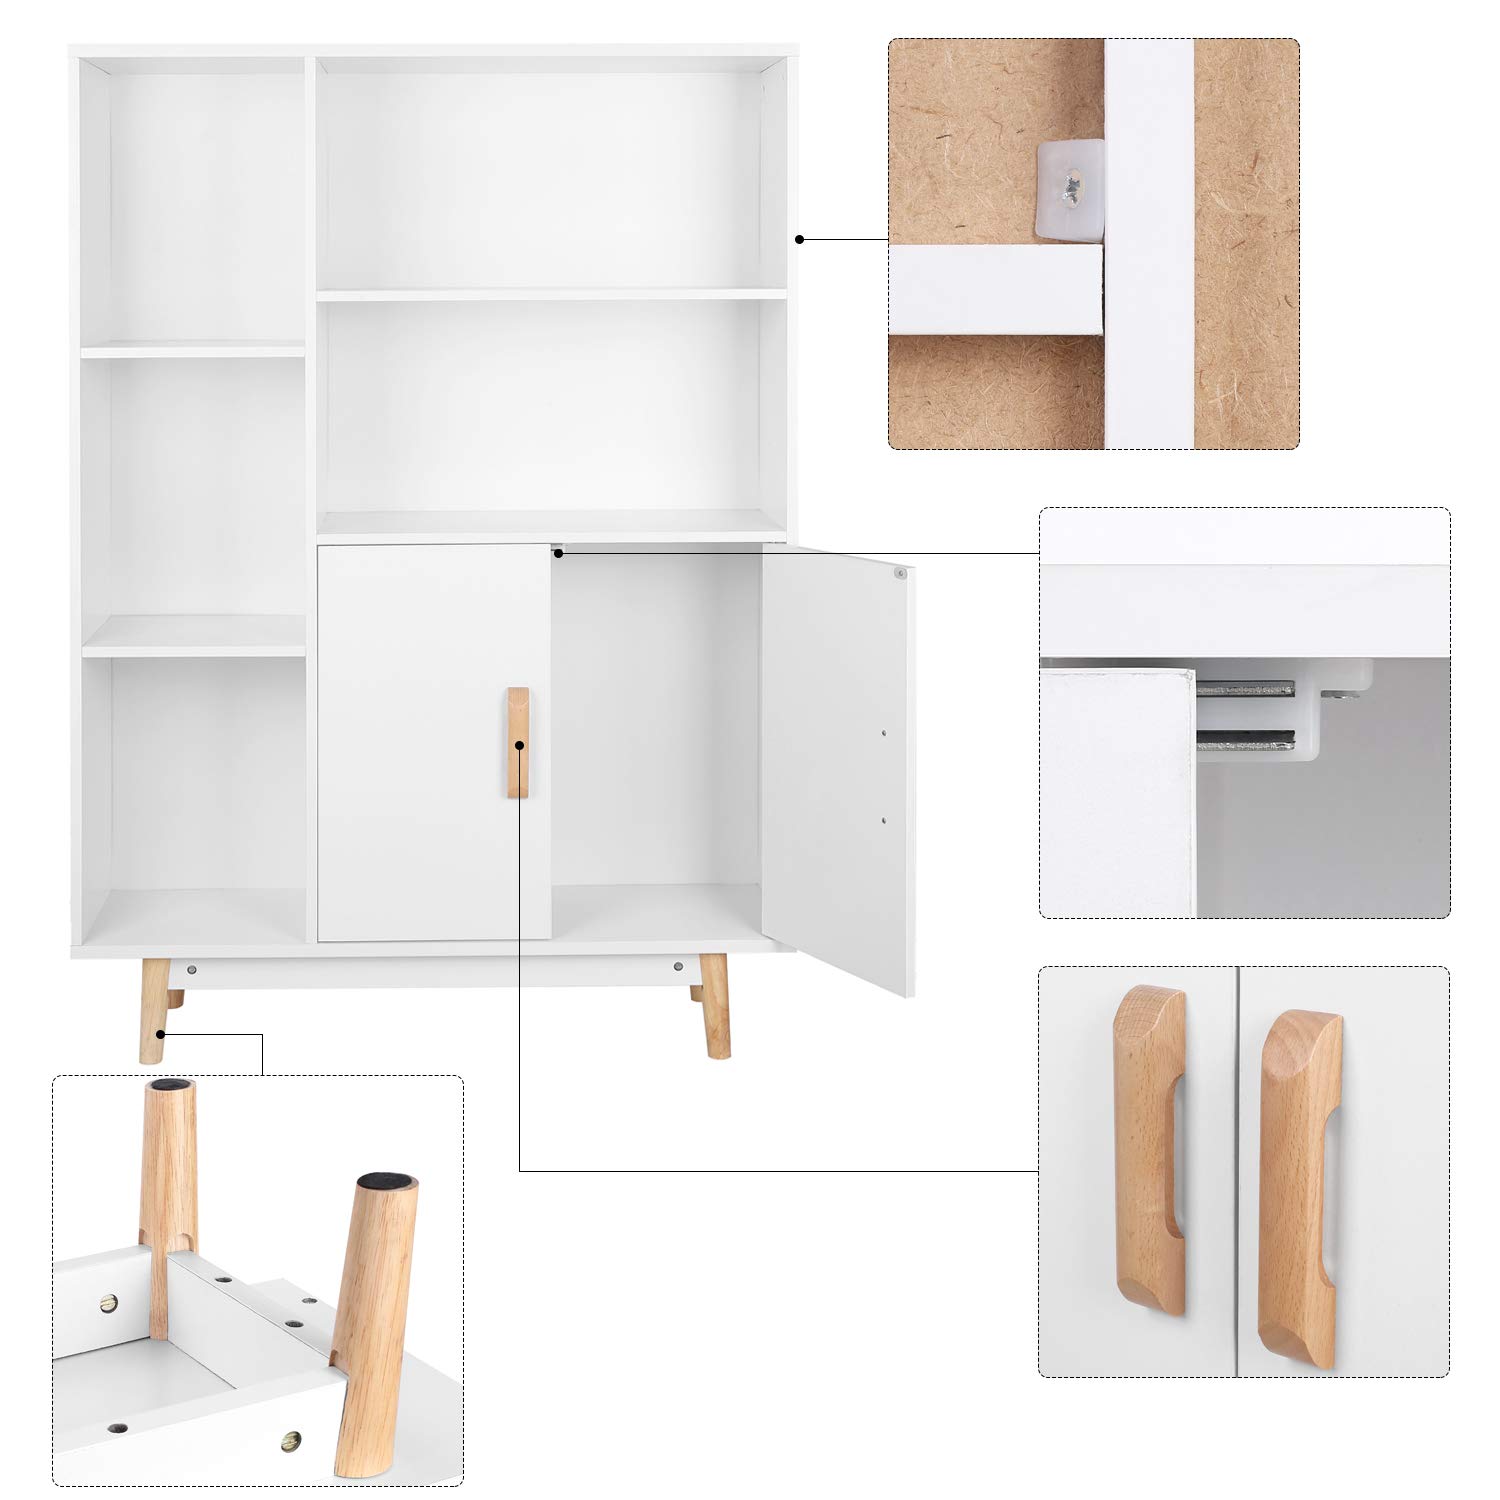 Homfa 5 Cube Bookcase with Door, Open Shelves Free Standing Storage Cabinet with Solid Legs, White Finish - image 4 of 12